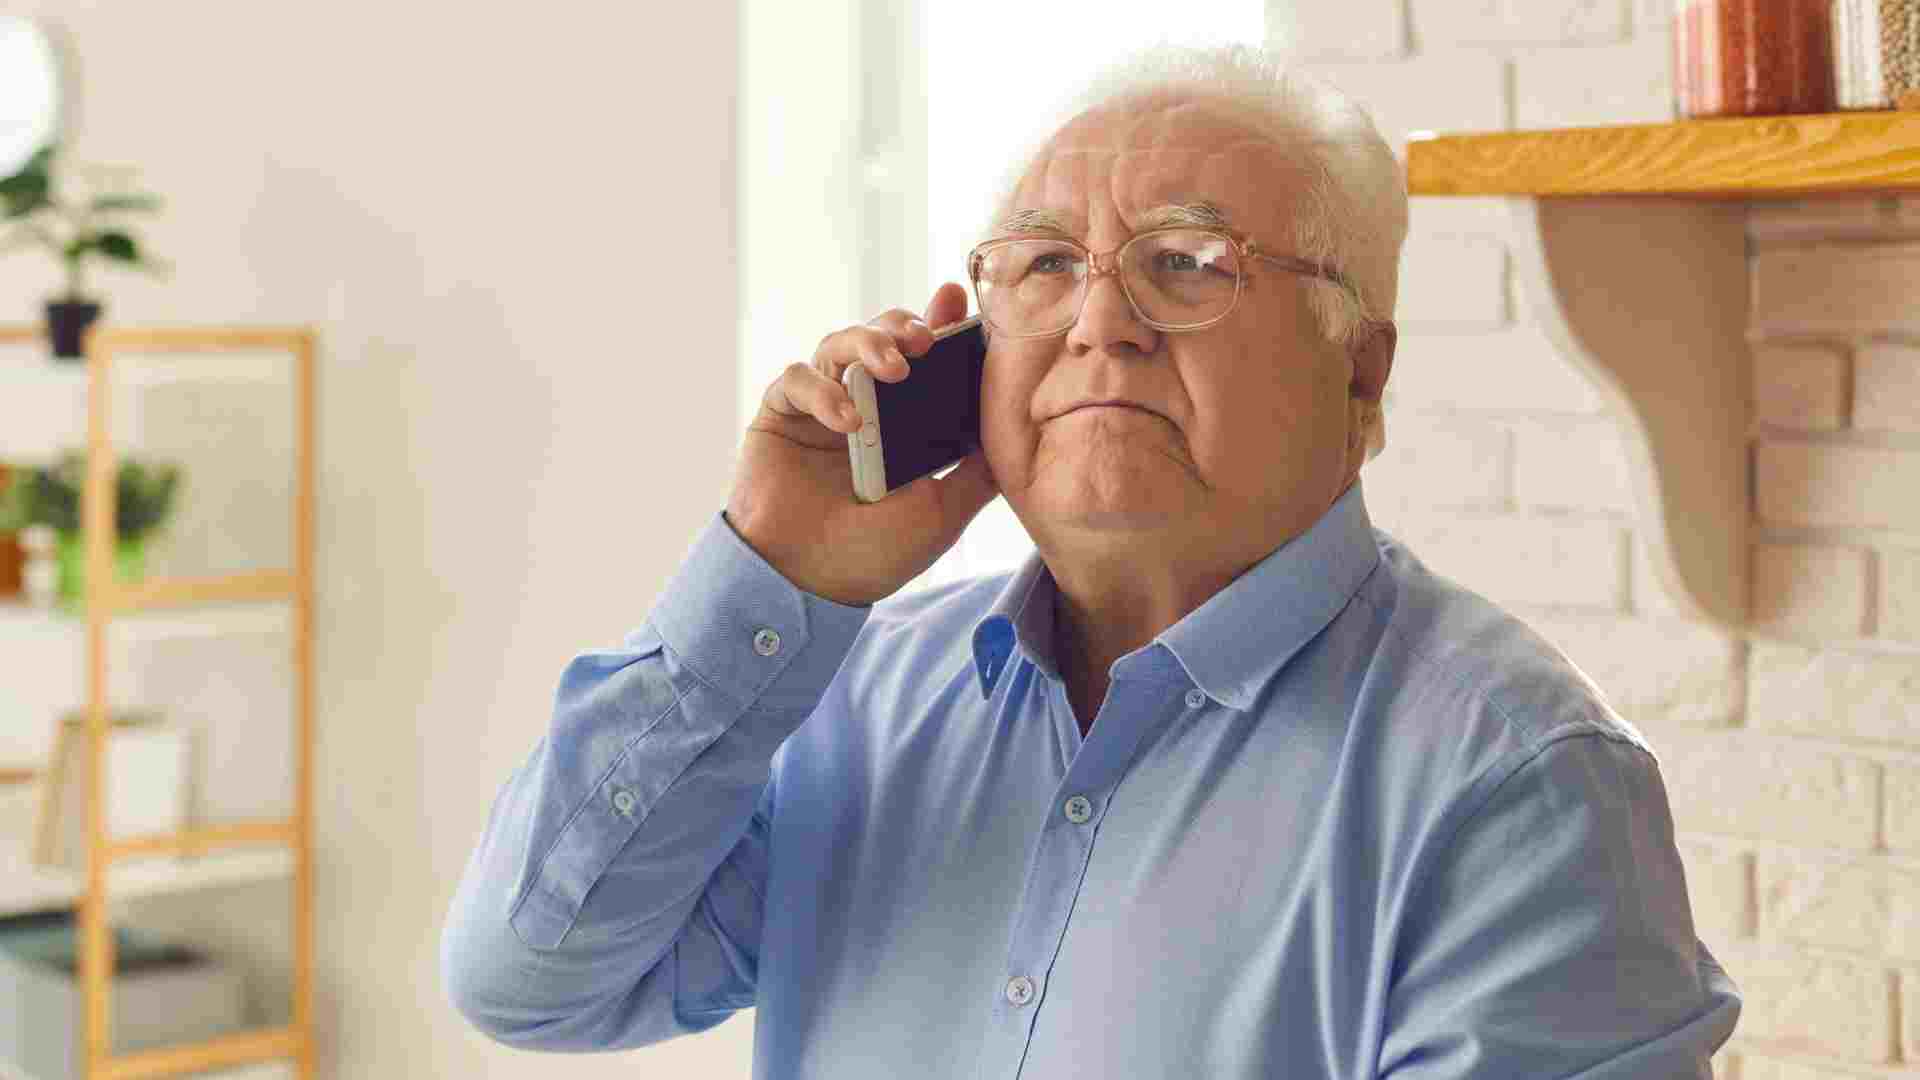 A man on the phone learning What to do after my spouse dies